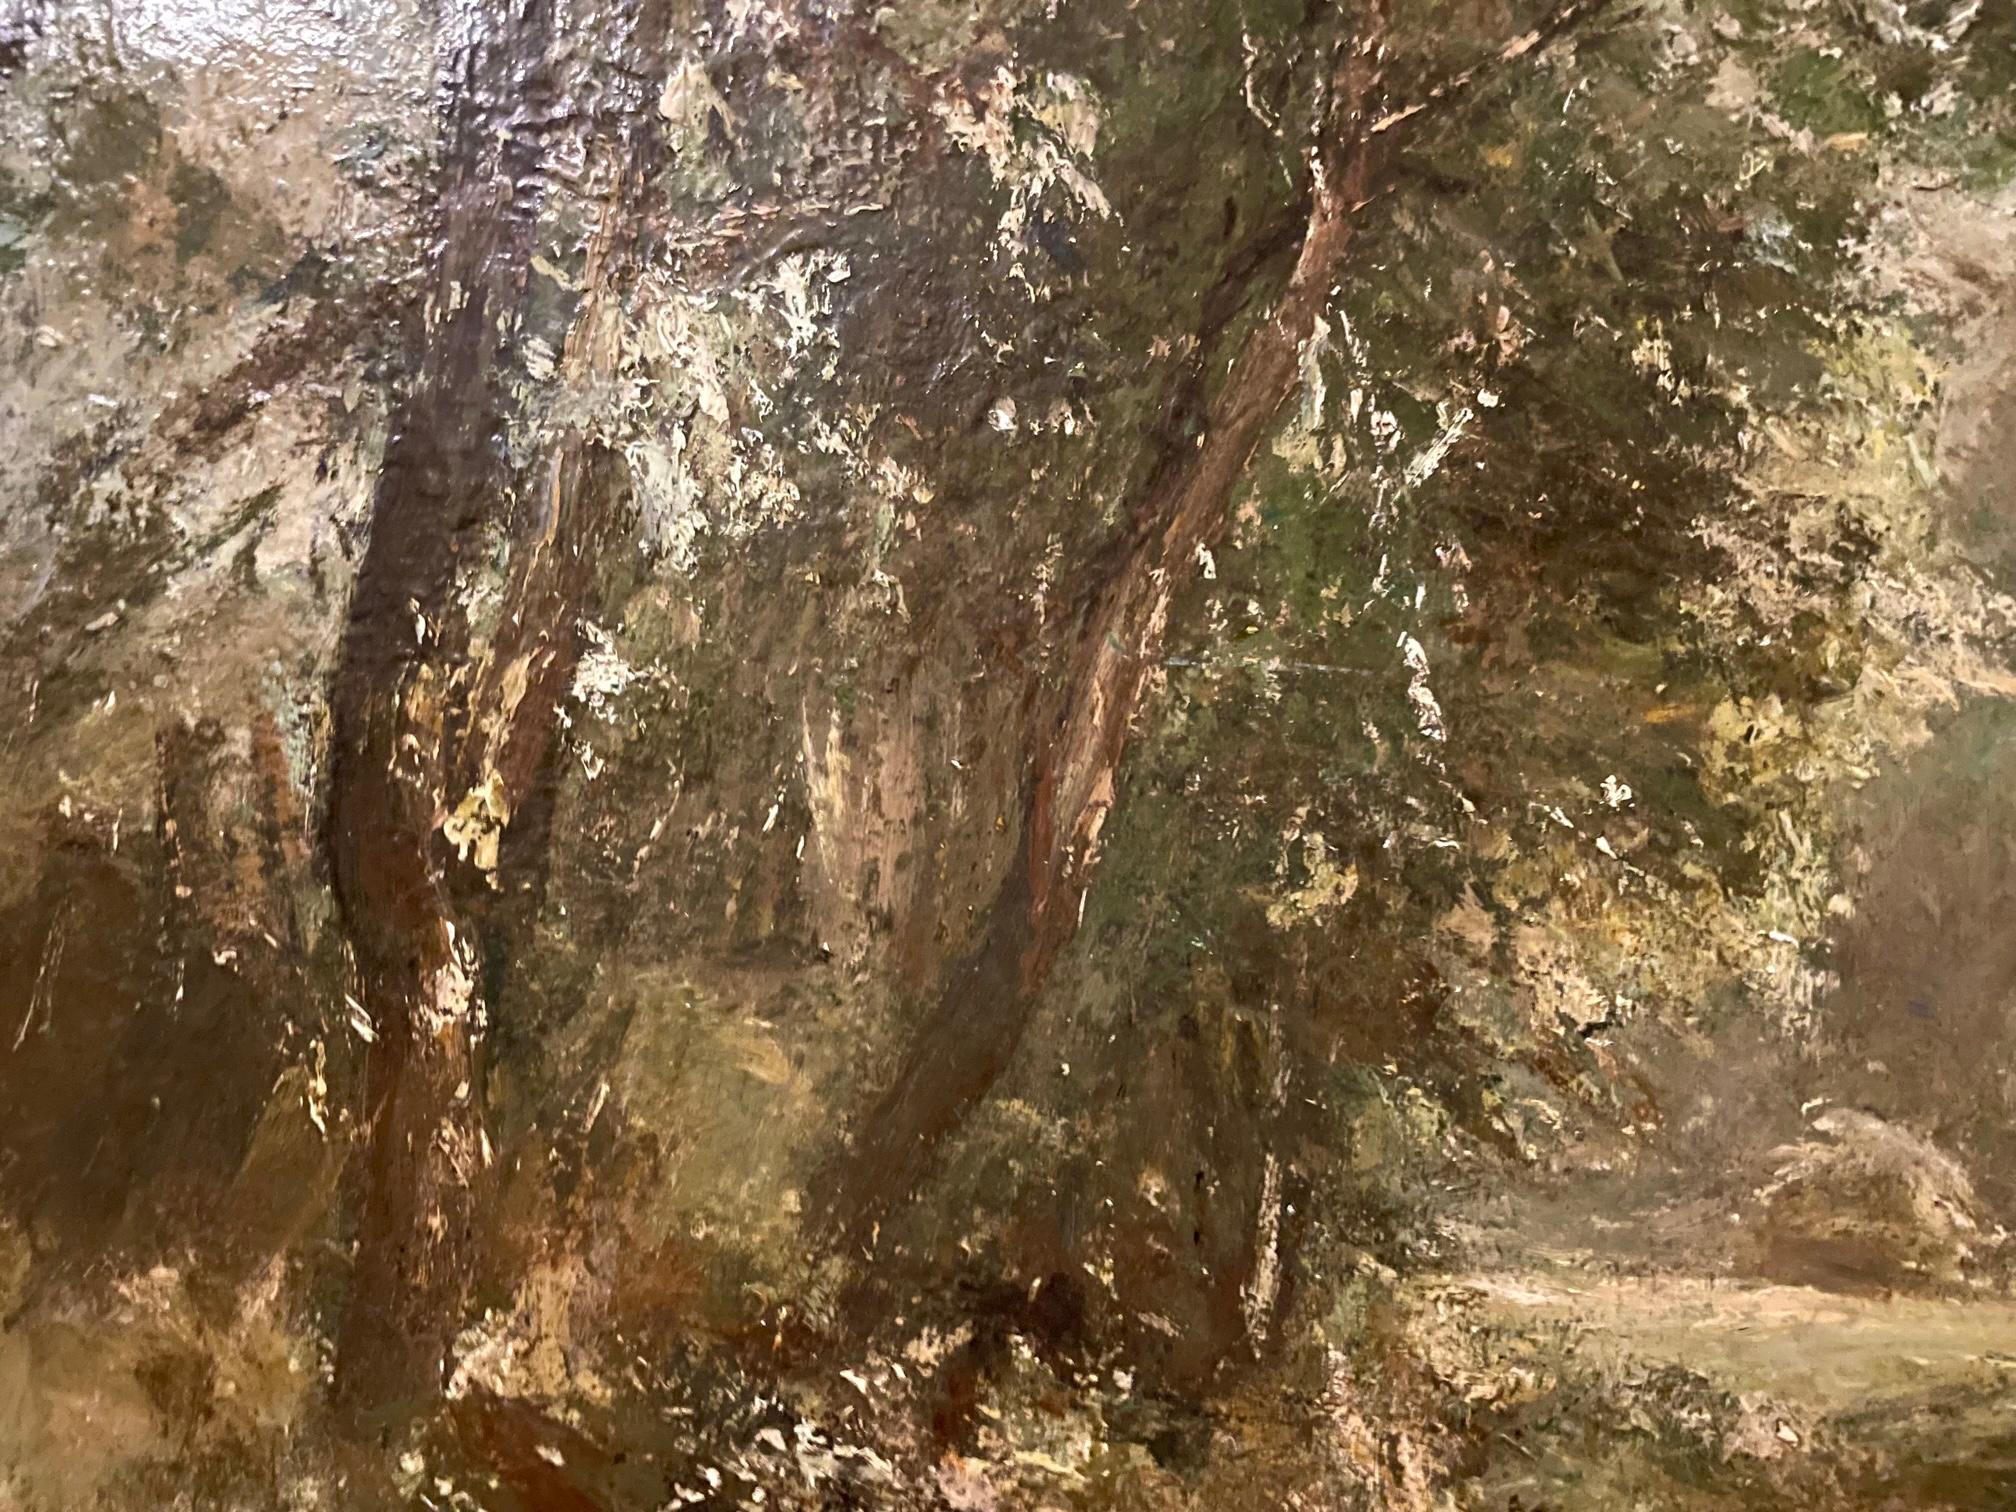 Impressionist oil painting of arching trees, titled 'Path Through Willow Trees, Summer' is by Sir James Lawton Wingate (1846-1924), President of the Royal Scottish Academy and knighted for his contribution to art.  Known for landscapes, Wingate